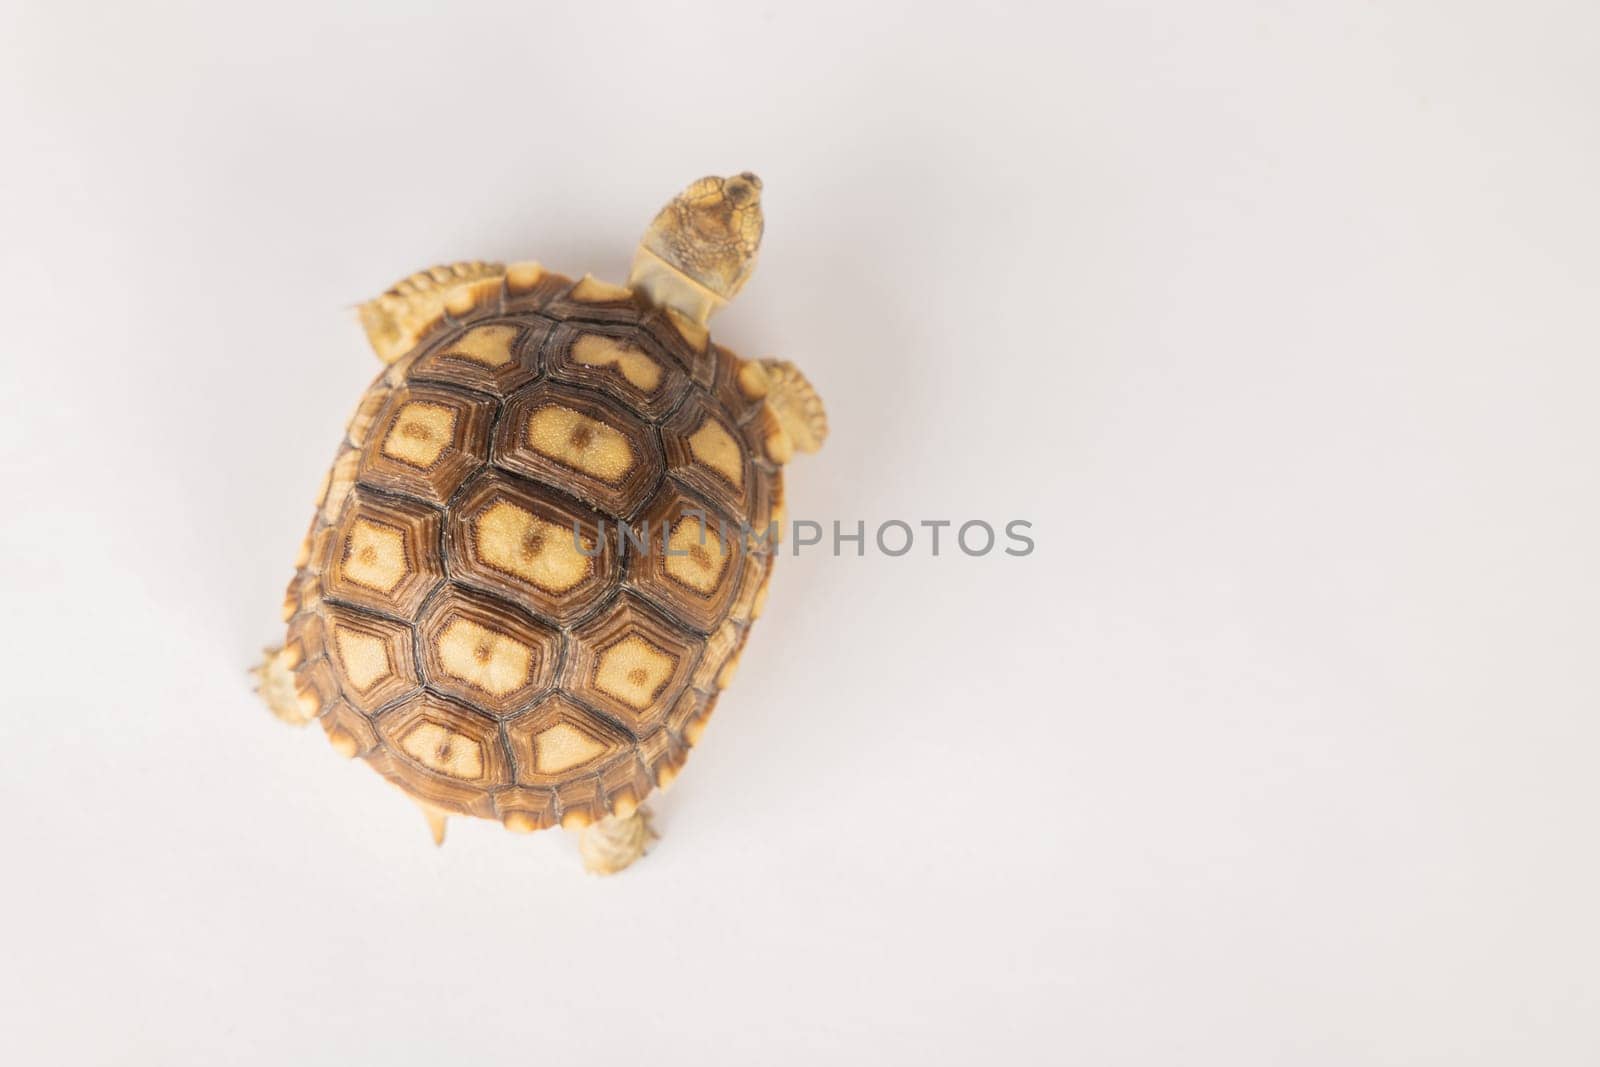 An isolated portrait of the sulcata tortoise, a patient and cute African reptile, highlights the beauty of its unique design and pattern against a white background.